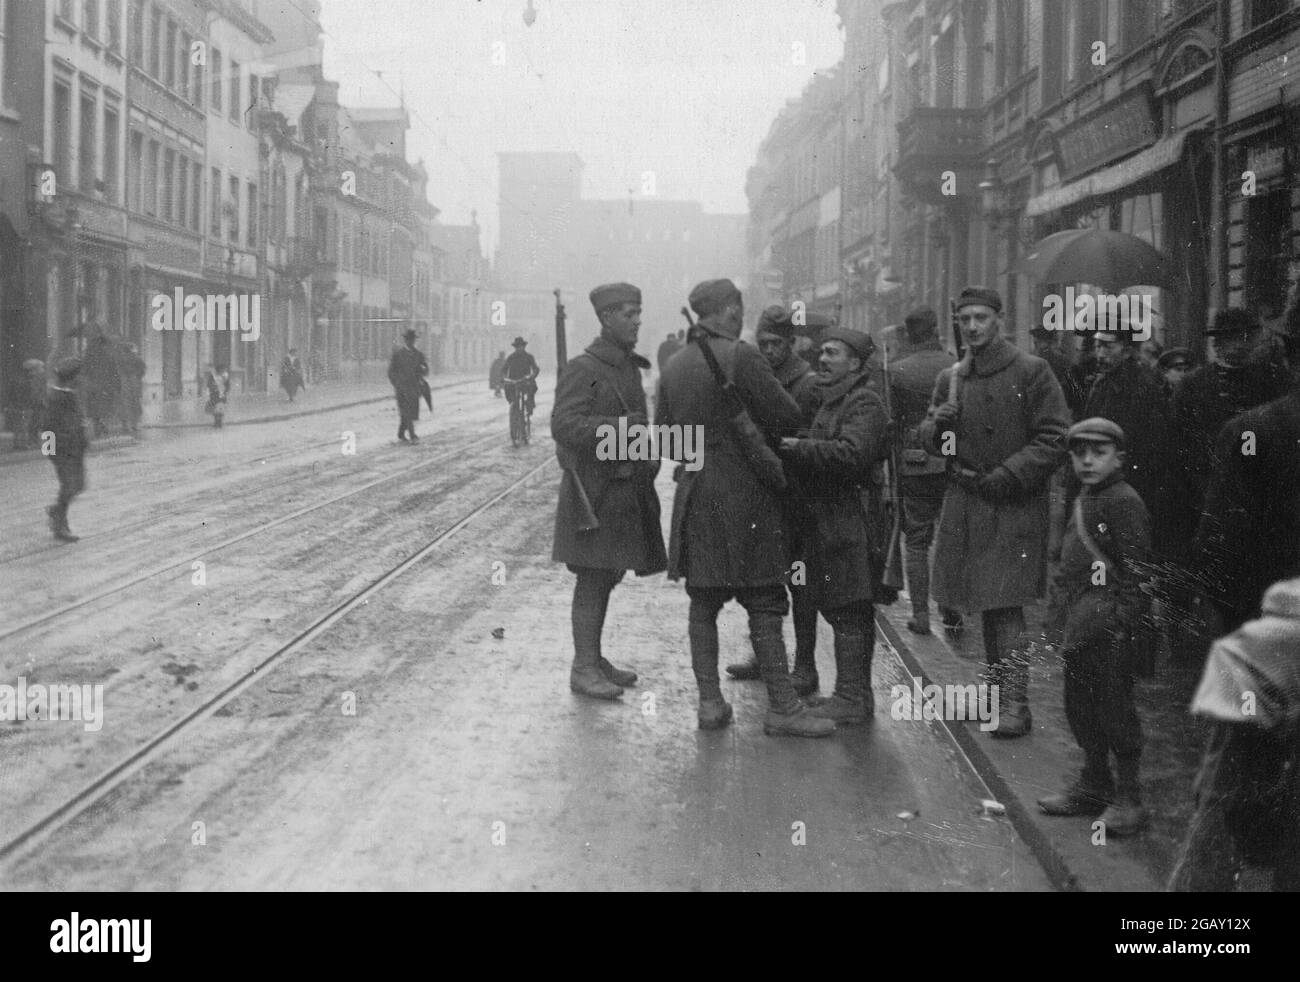 TREVES, GERMANY - 04 May 1919 - Army of Occupation - American soldiers in Treves, Germany. The city of Trier would also have been known as Treves in E Stock Photo